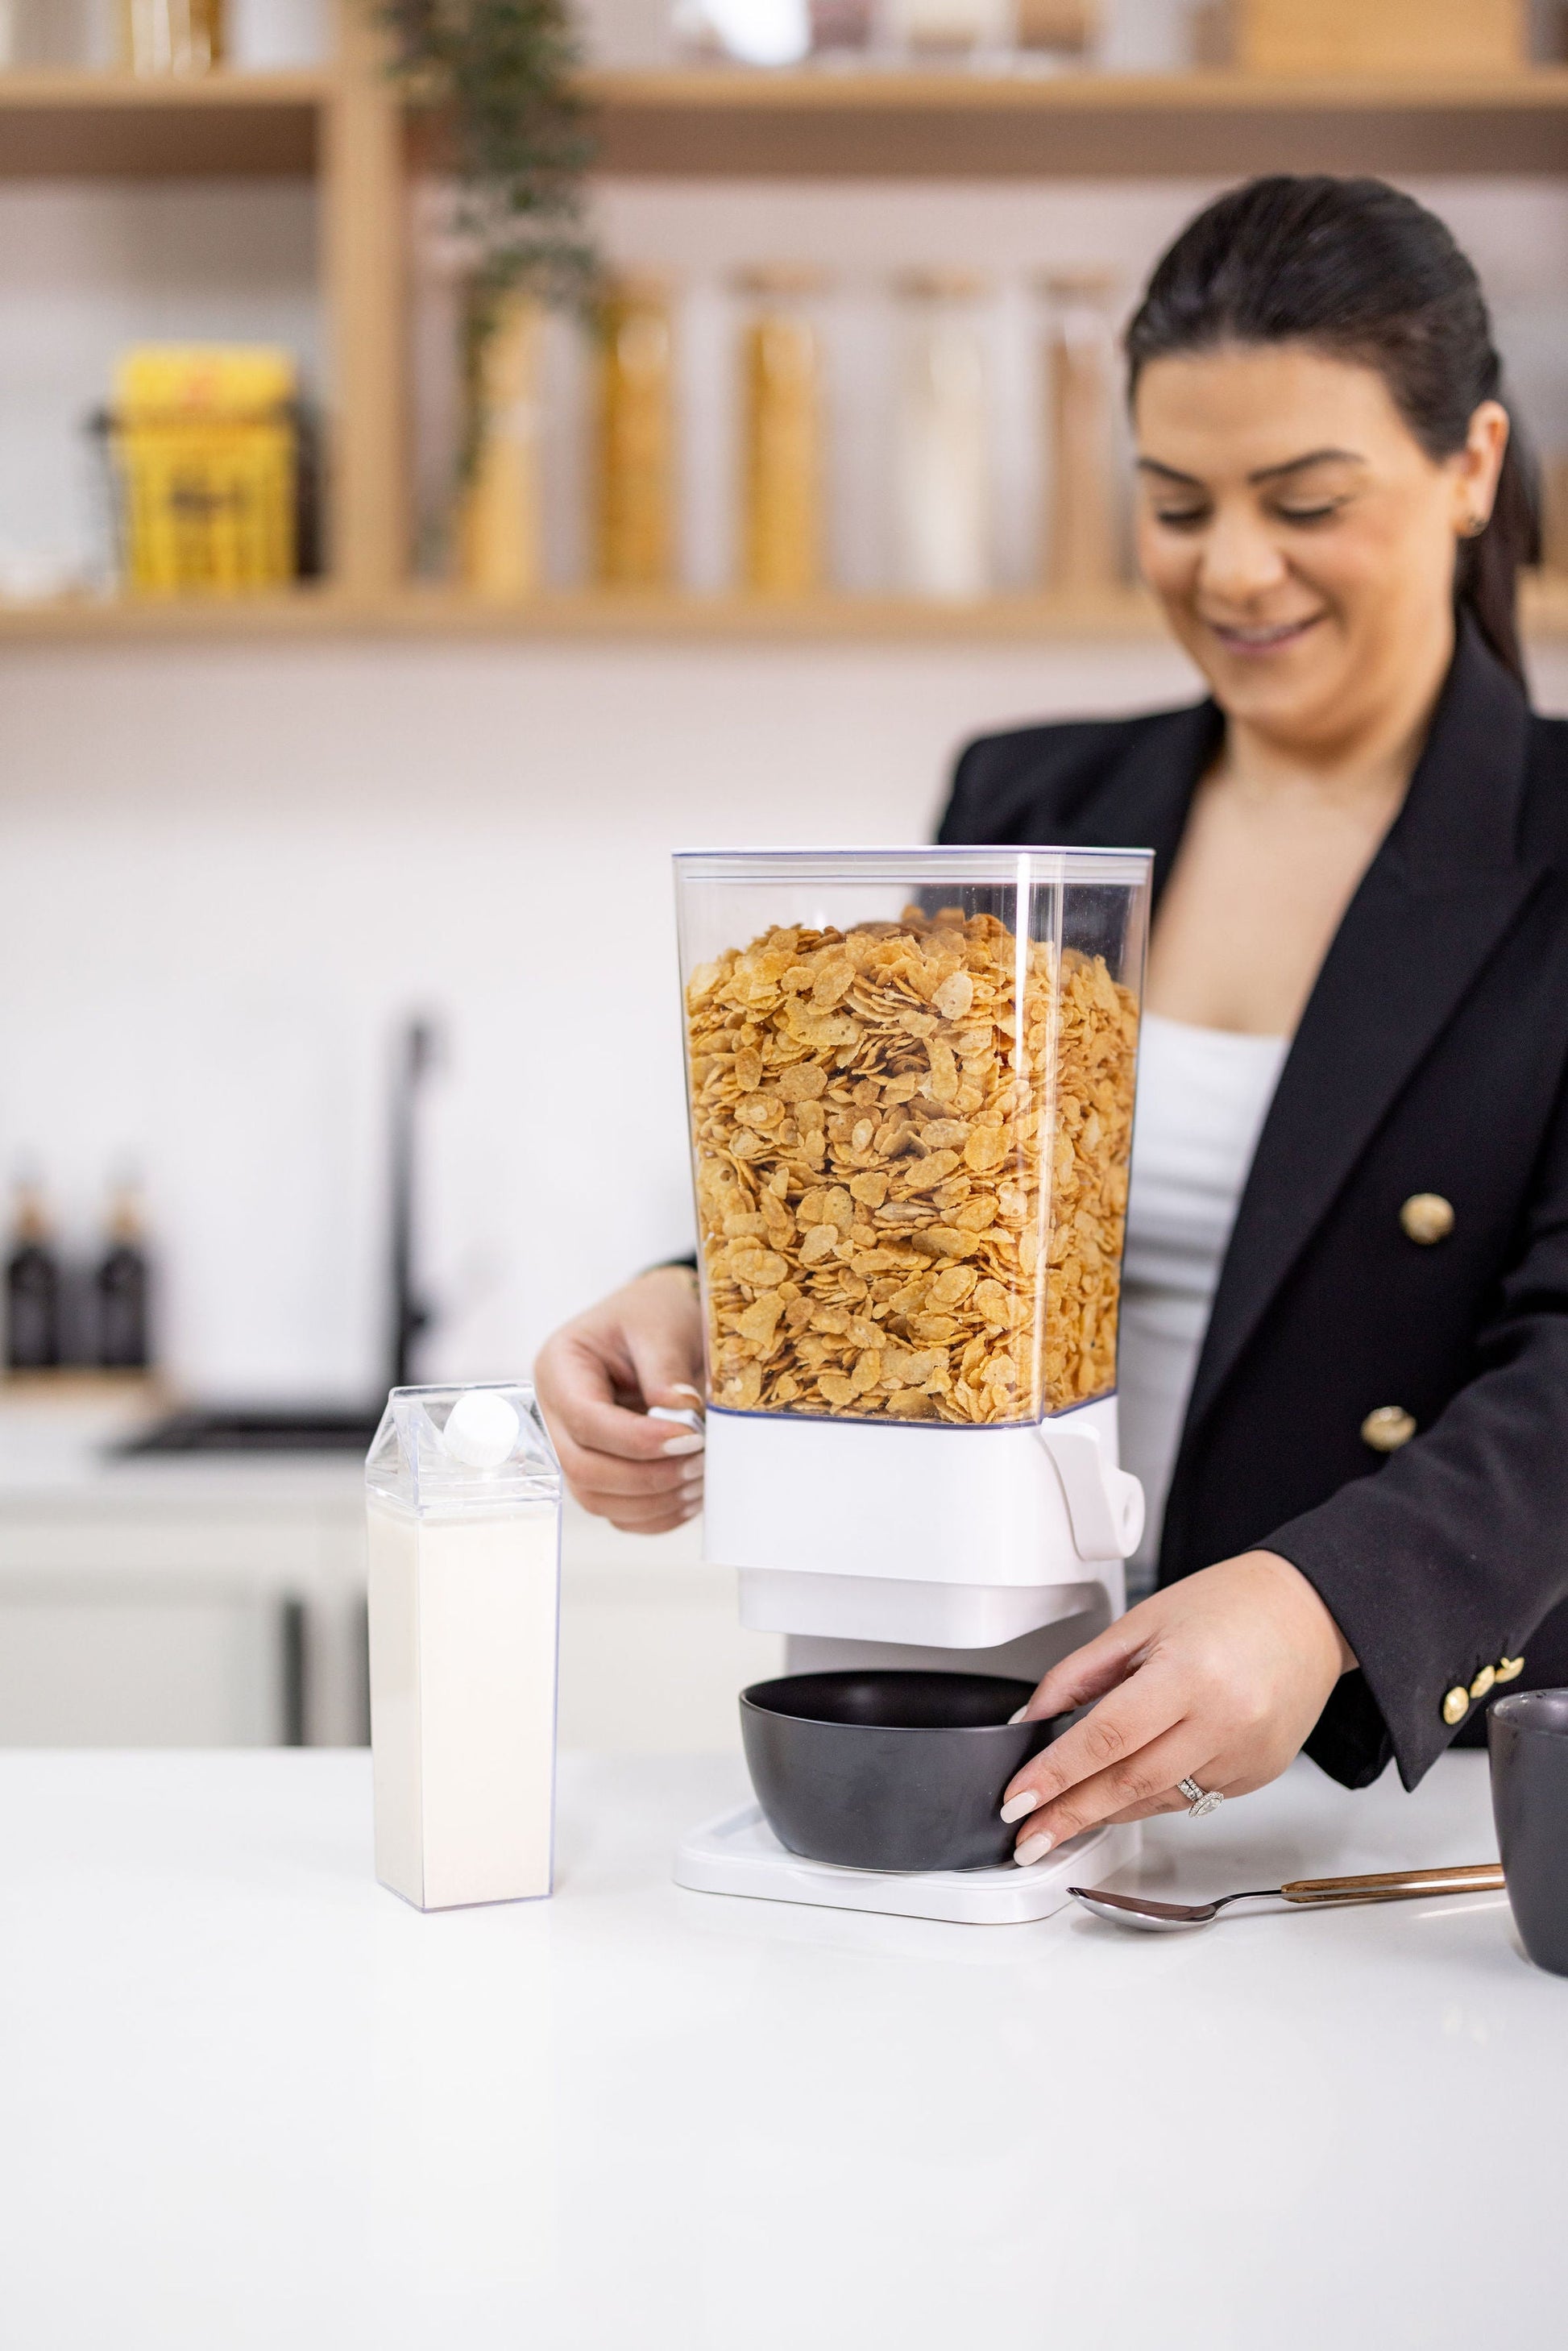 cereal dispenser, kitchen organisation, freshness, mess-free, pantry organisation, home organisation, durable, dishwasher safe, versatile, nuts, snacks, coffee beans, candy, stylish, modern, convenient, kitchen gadget, perfect portions, crispy cereal